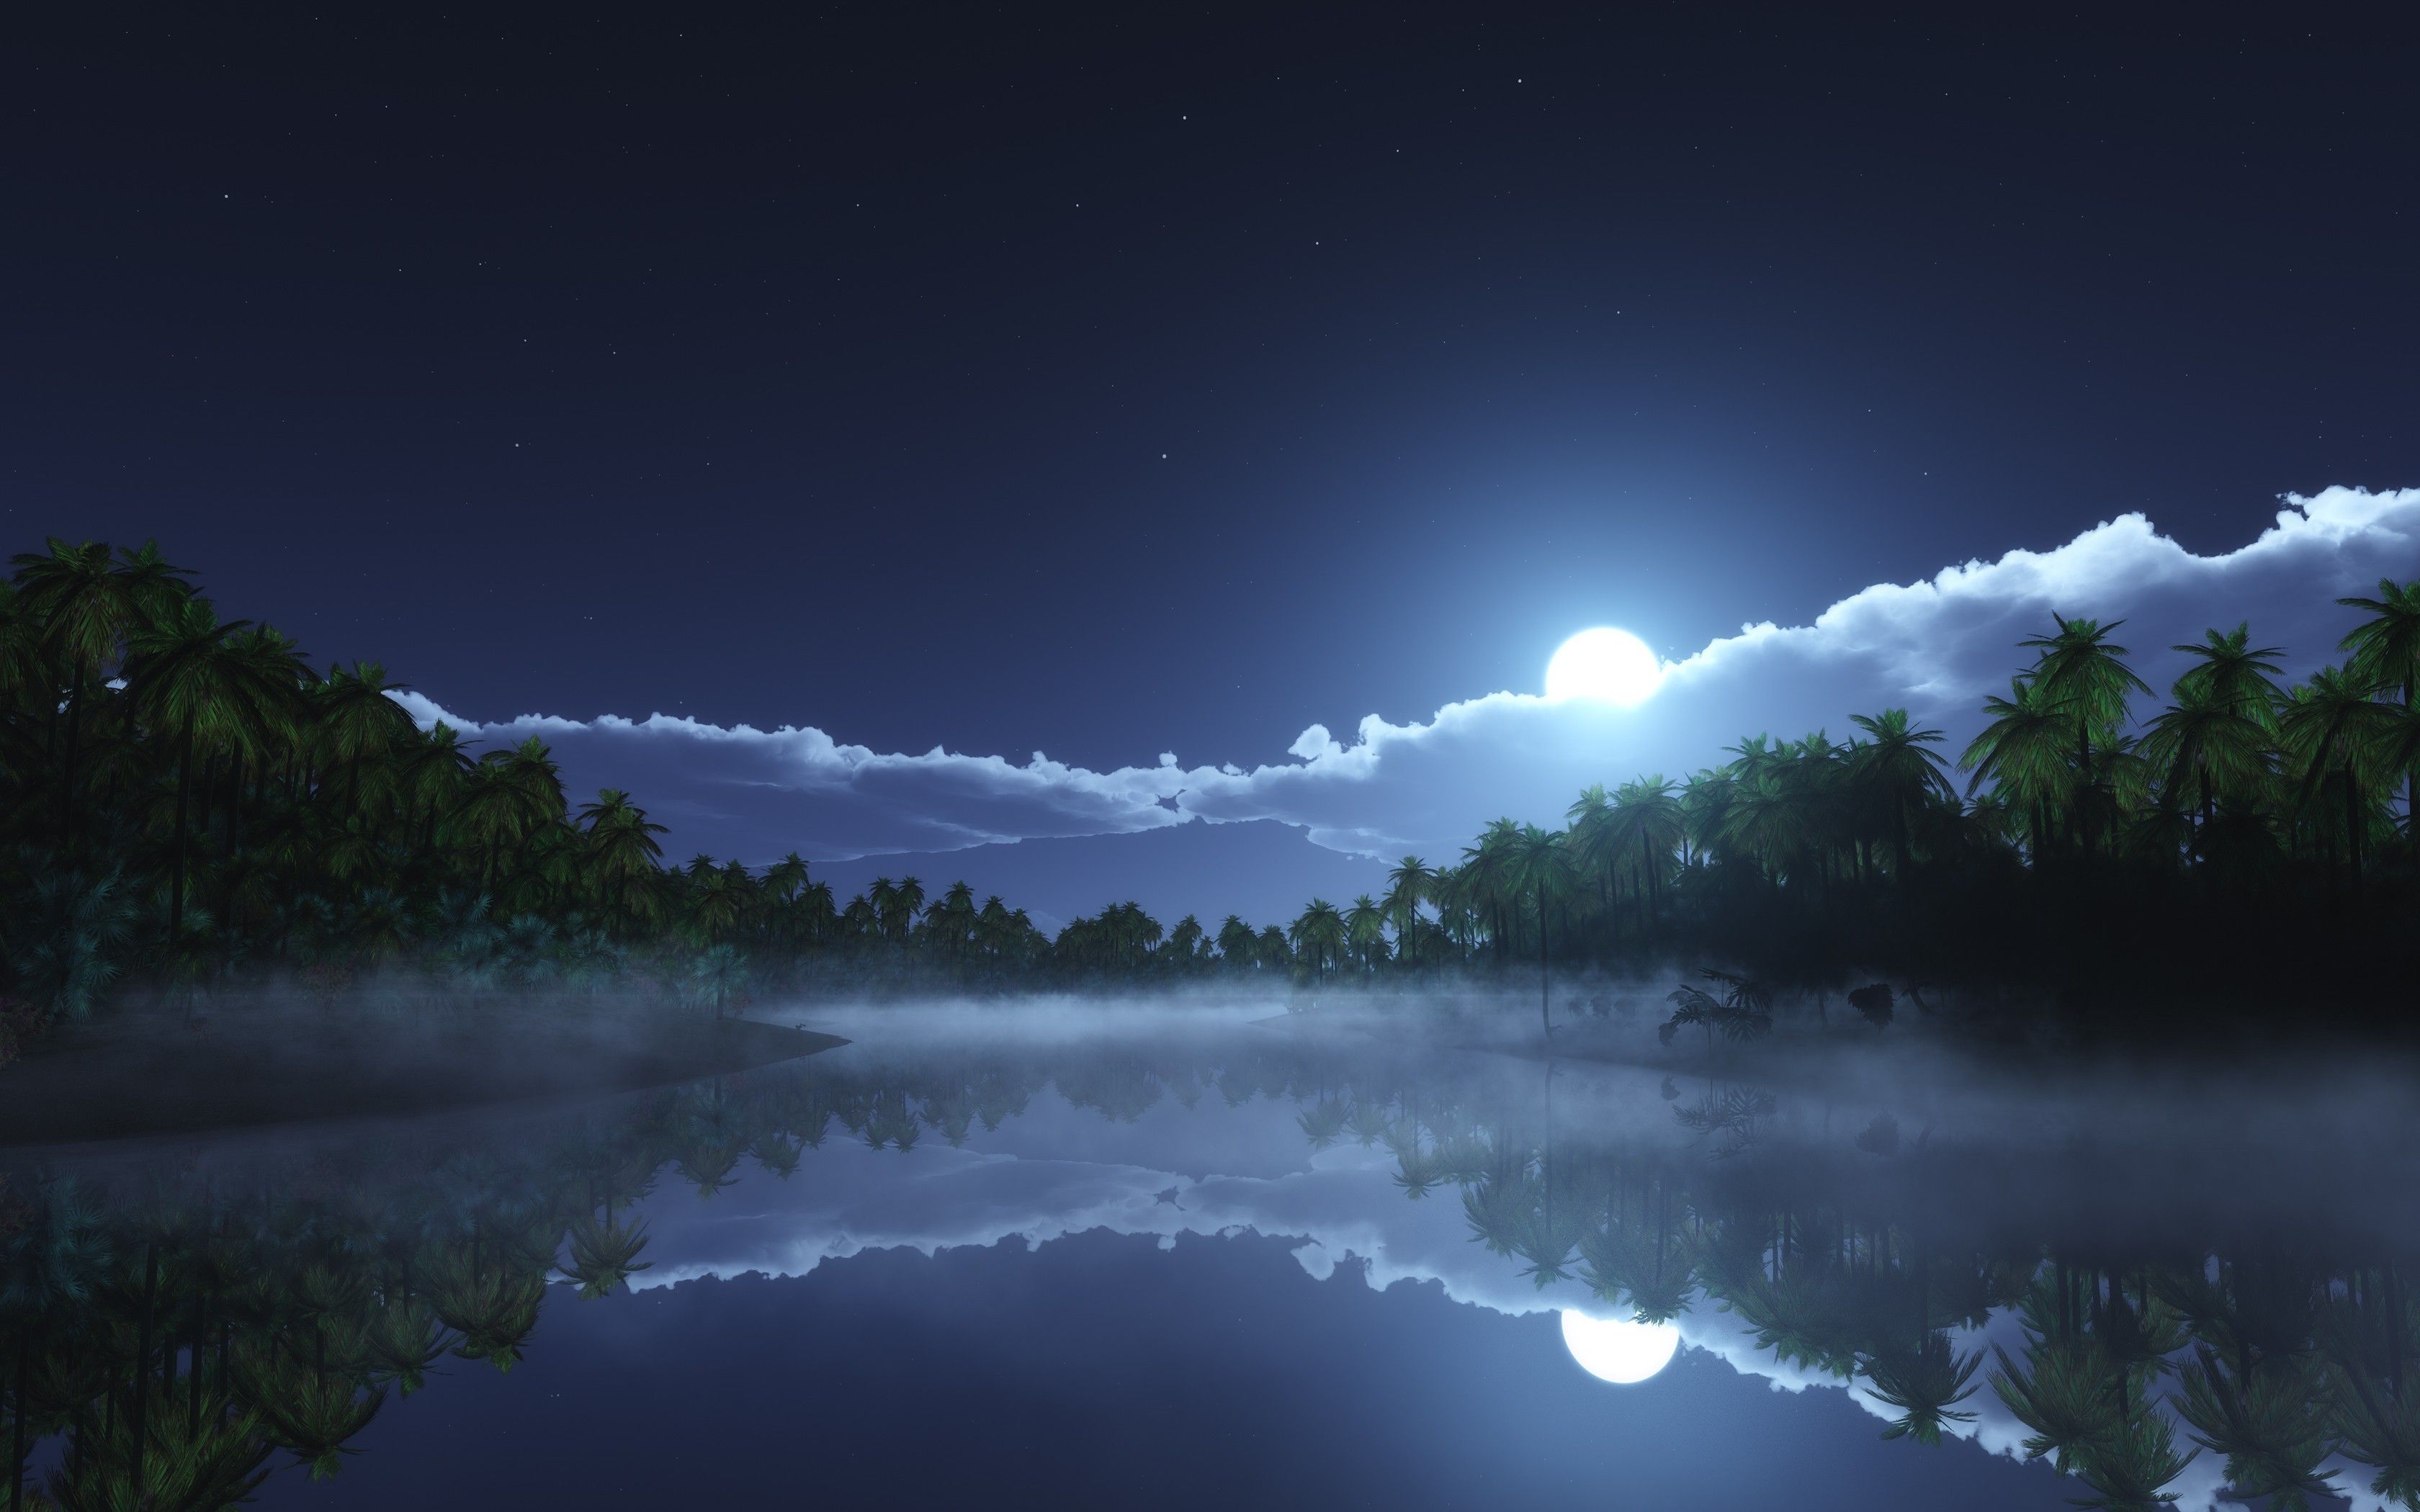 nature, Landscape, Starry Night, Moonlight, Clouds, Tropical, Mist, Palm Trees, Lake, Reflection Wallpaper HD / Desktop and Mobile Background